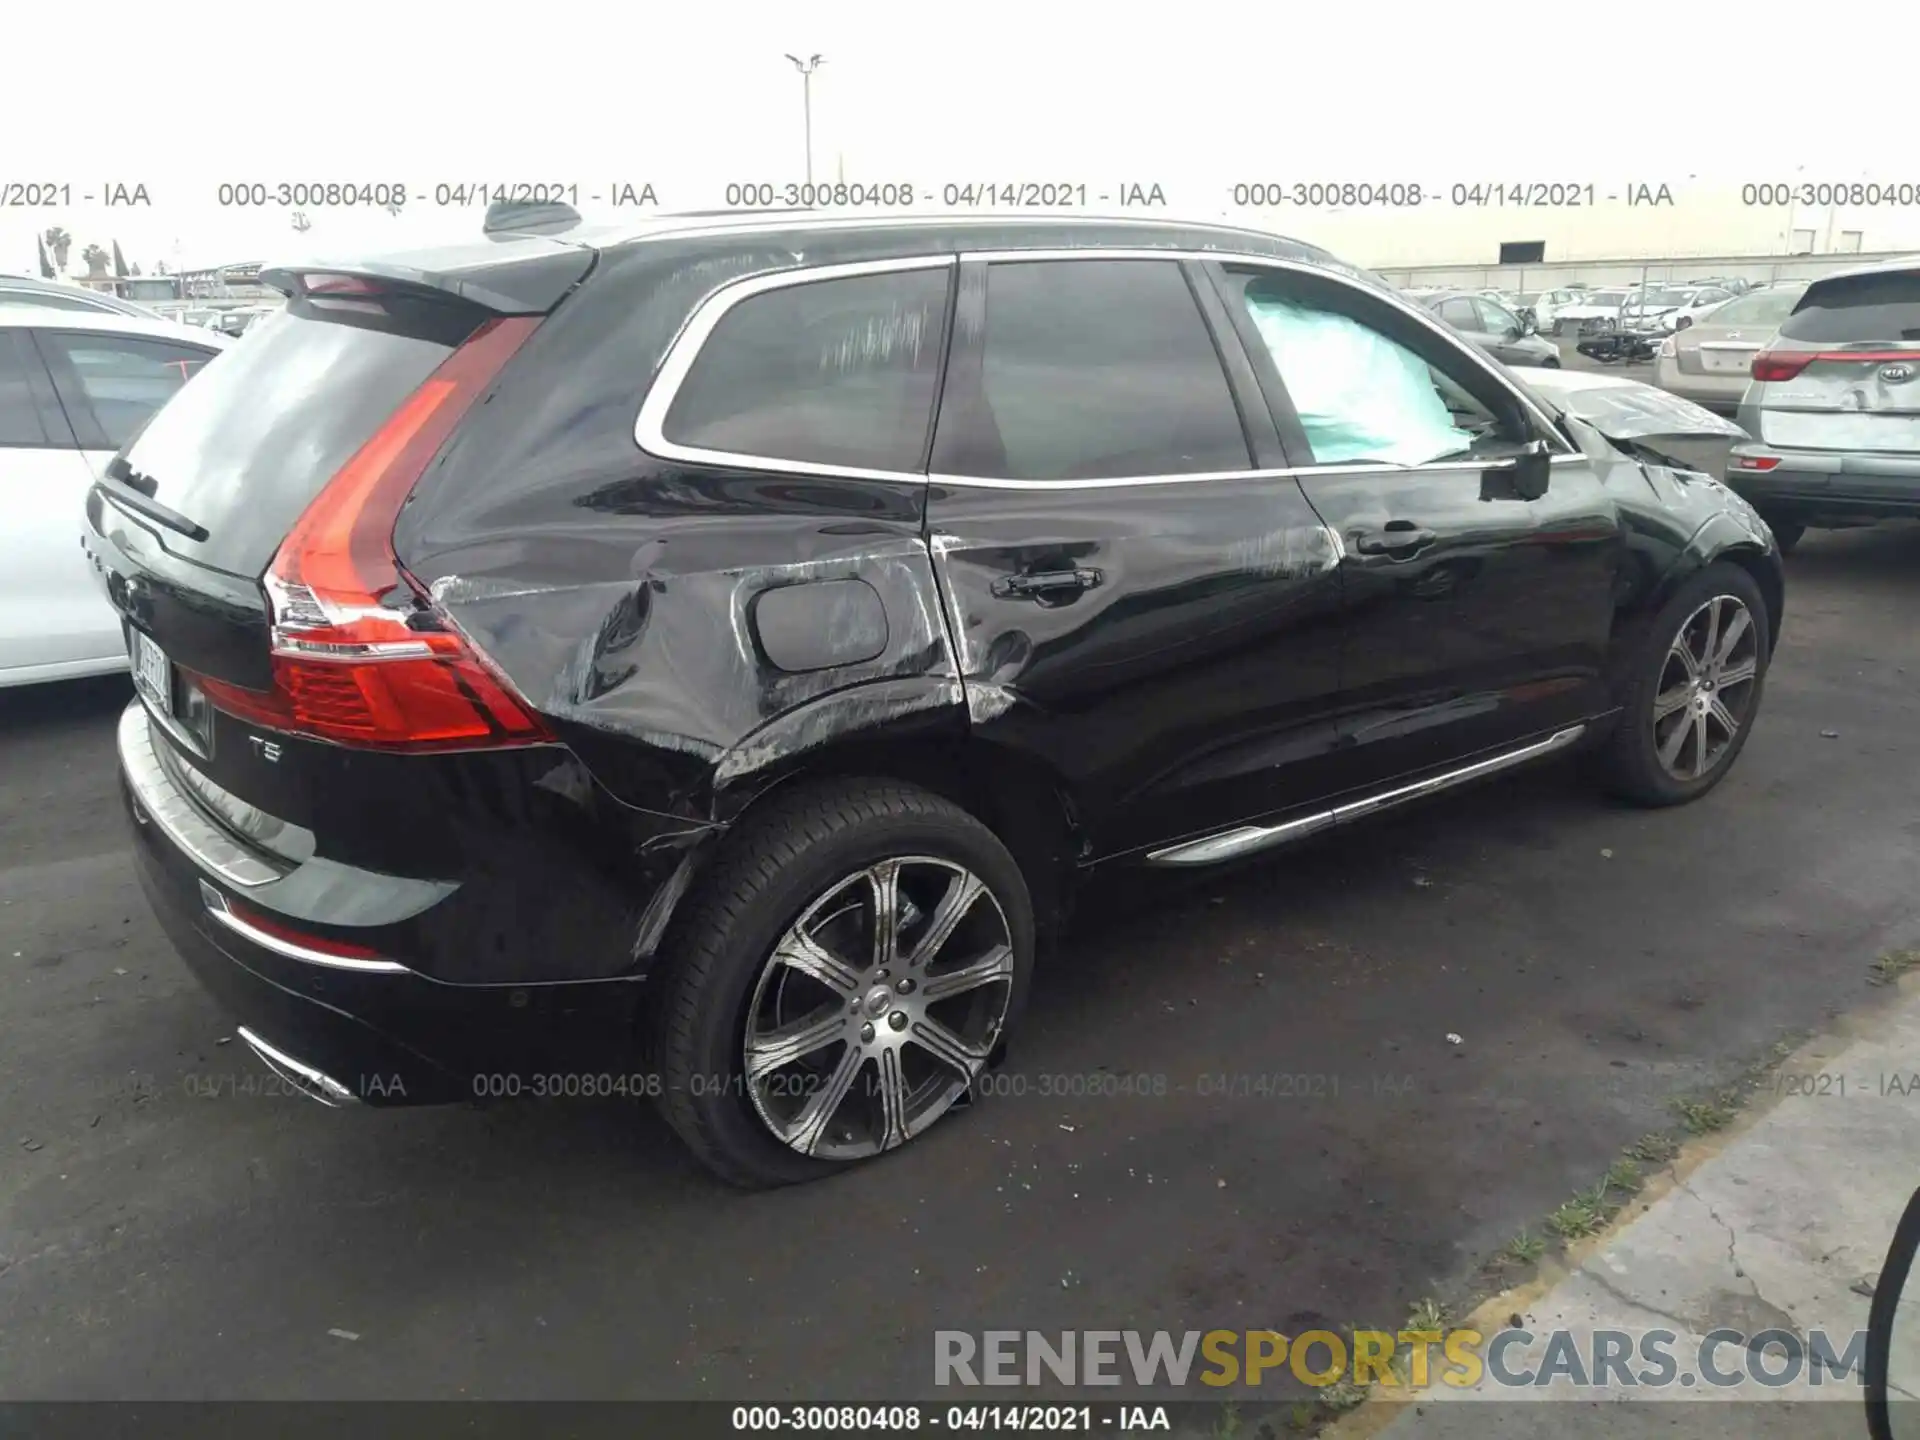 4 Photograph of a damaged car YV4102DL5M1684268 VOLVO XC60 2021